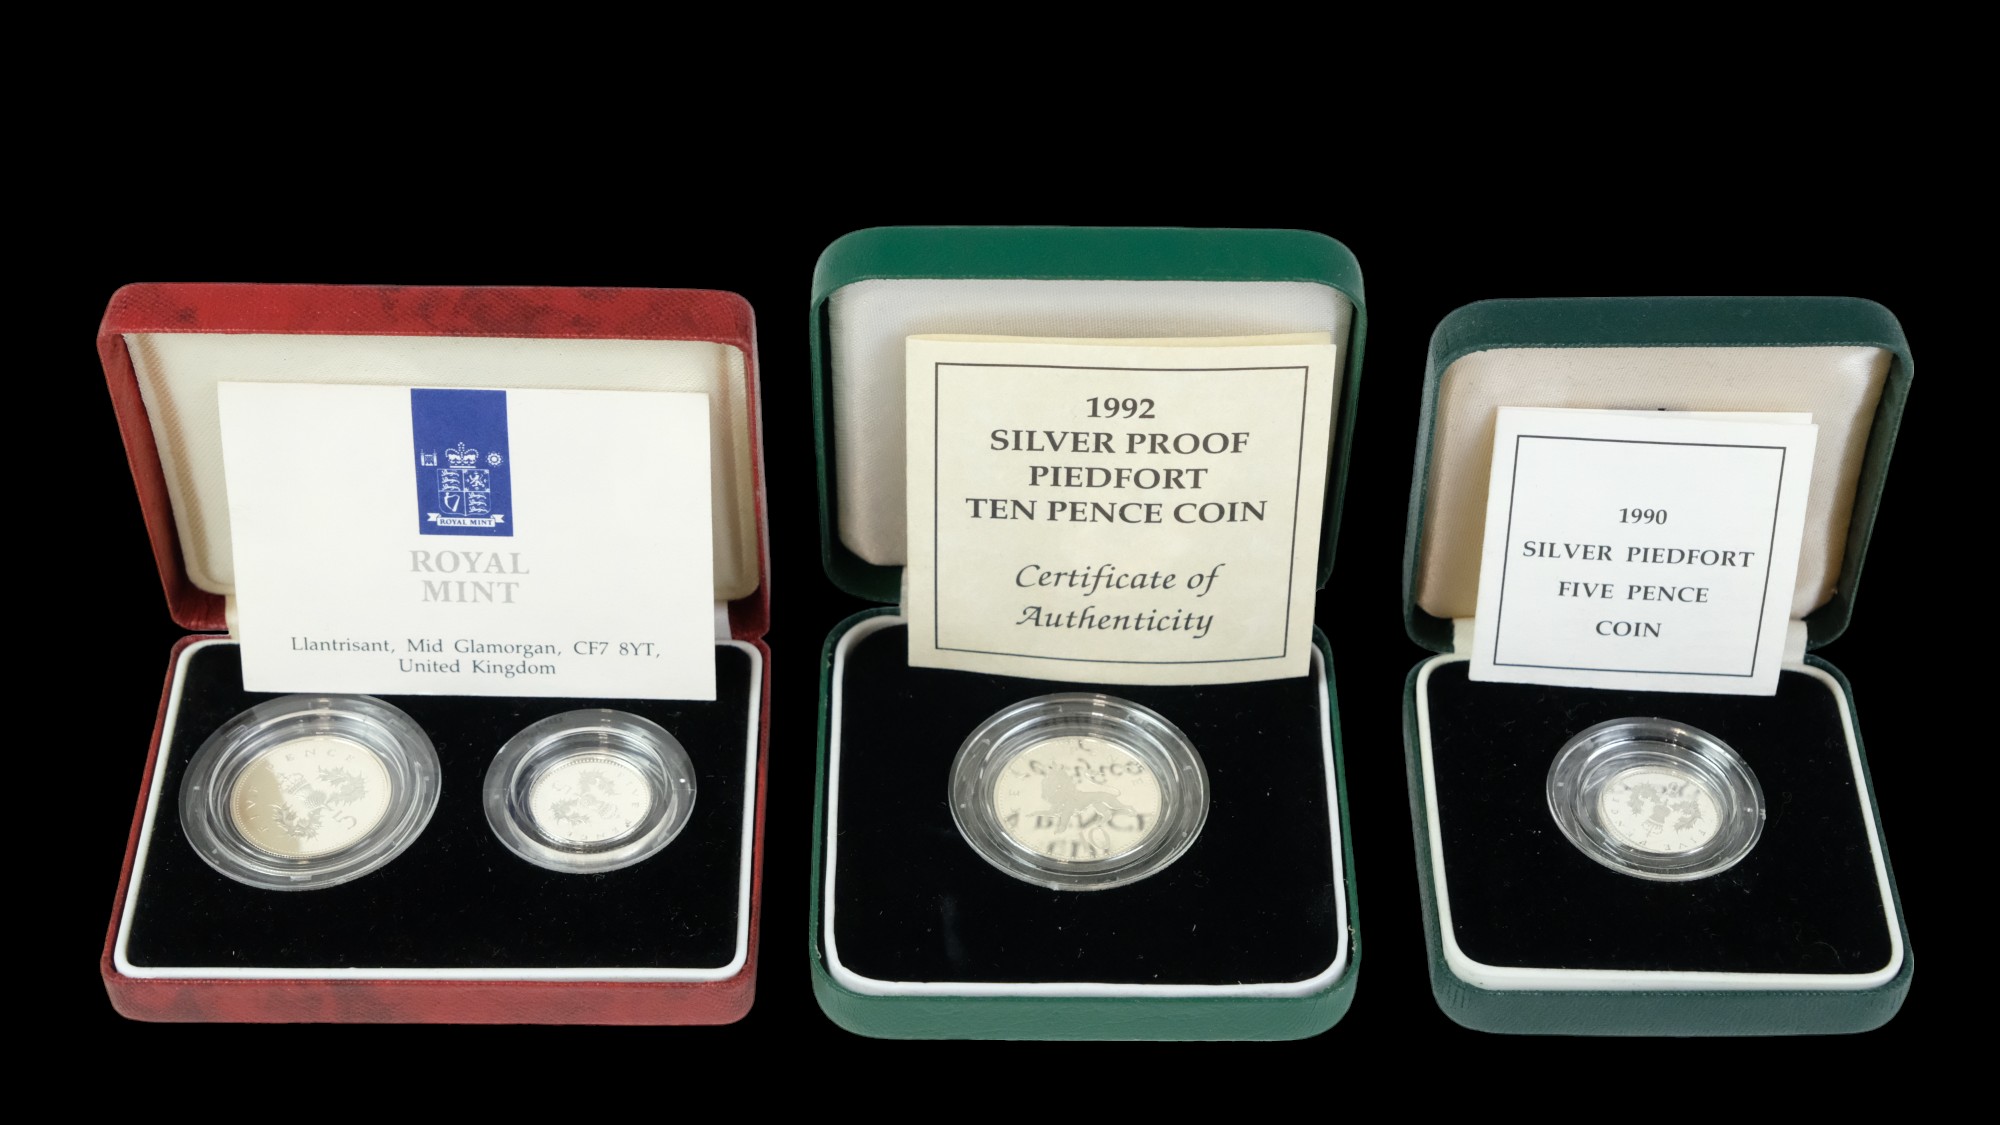 A cased Royal Mint 1990 Silver Proof Five Pence Two-Coin Set, together with 1990 five pence and a